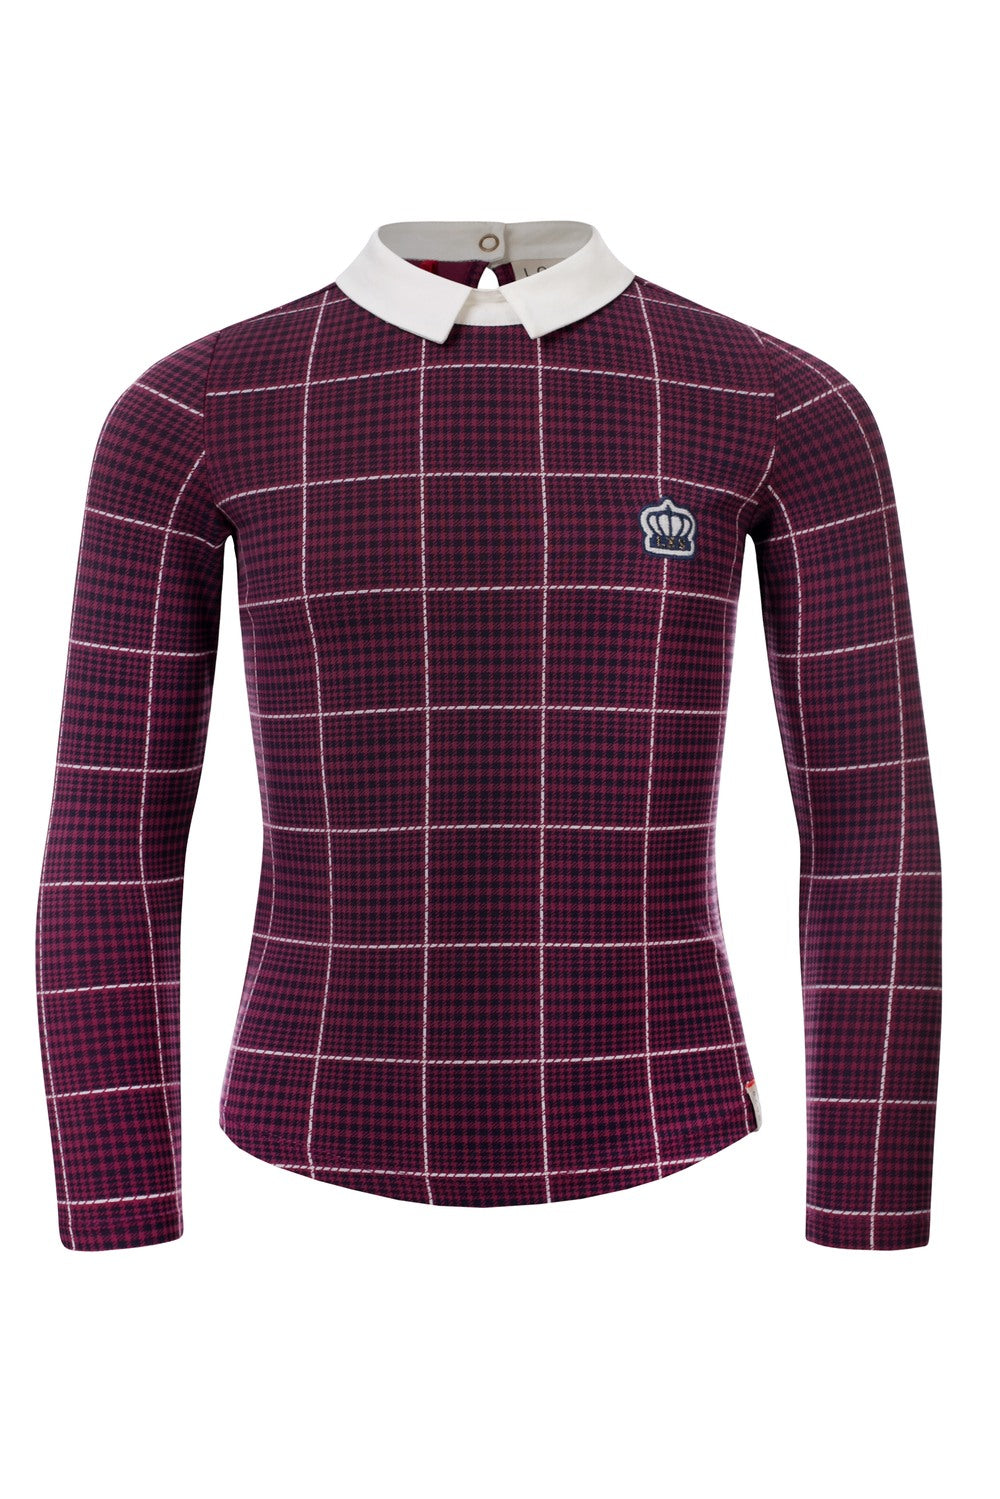 Loox's Revol. Longsleeve with checkered collar